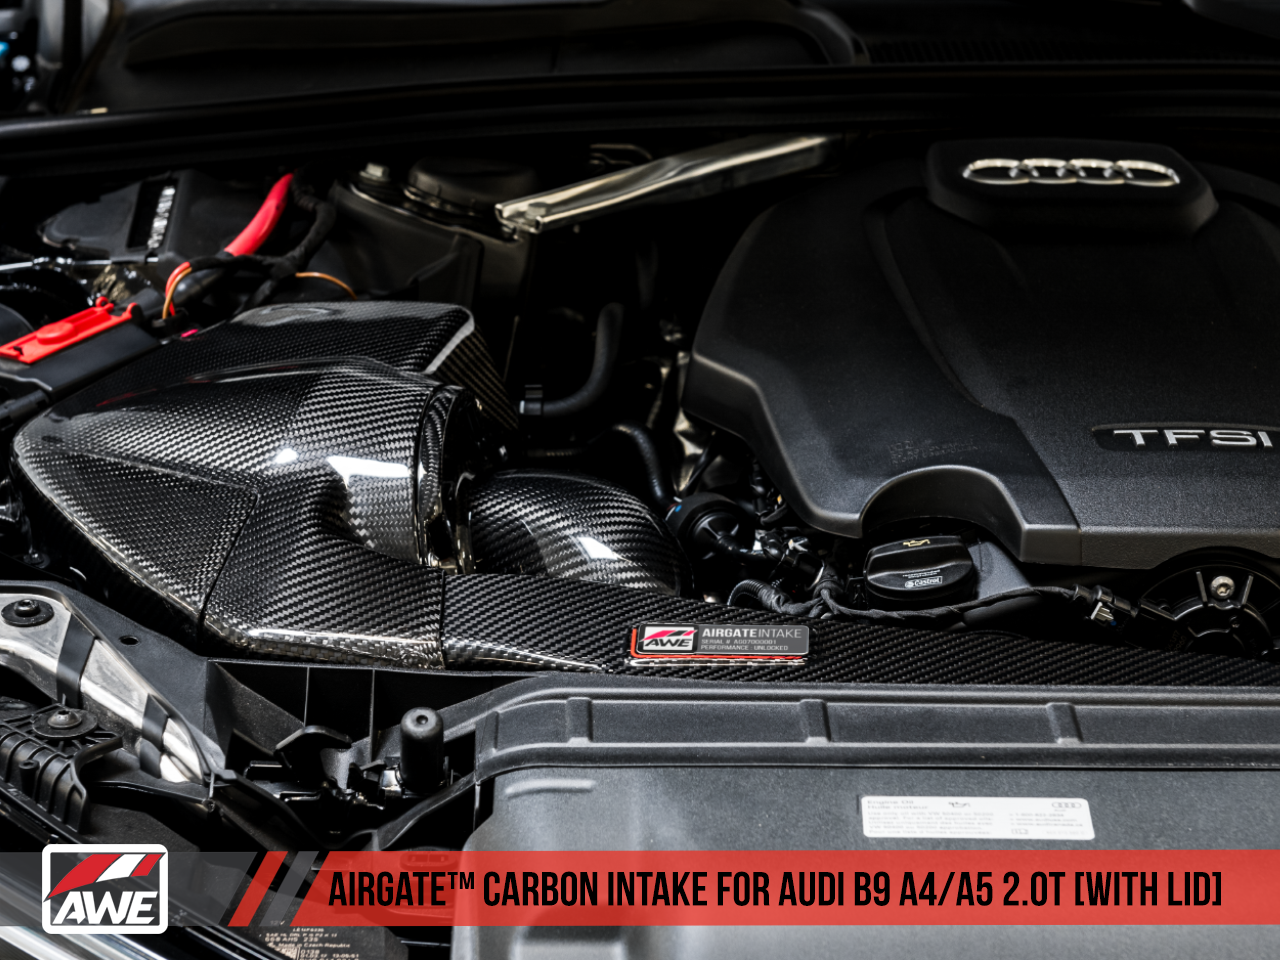 AWE AirGate™ Carbon Fiber Intake for Audi B9 A4 / A5 2.0T - With Lid